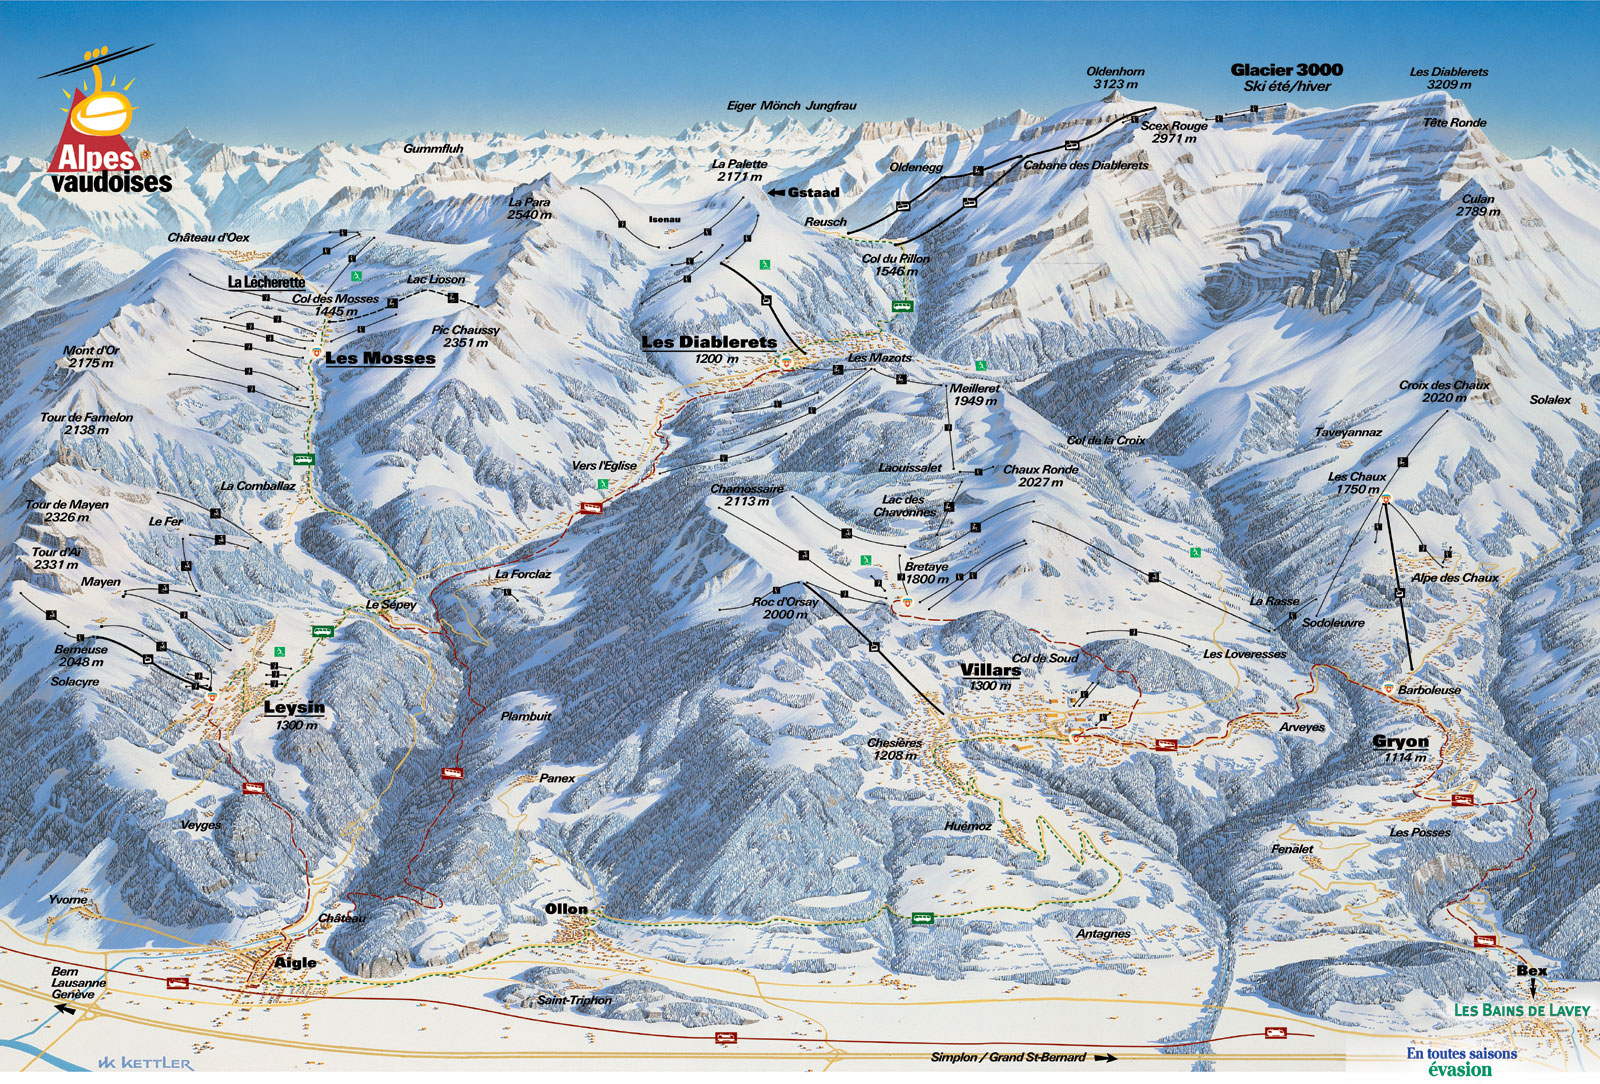 Villars - a ski area with more than 225 km of skiing between 1'300 and 3'000 meters